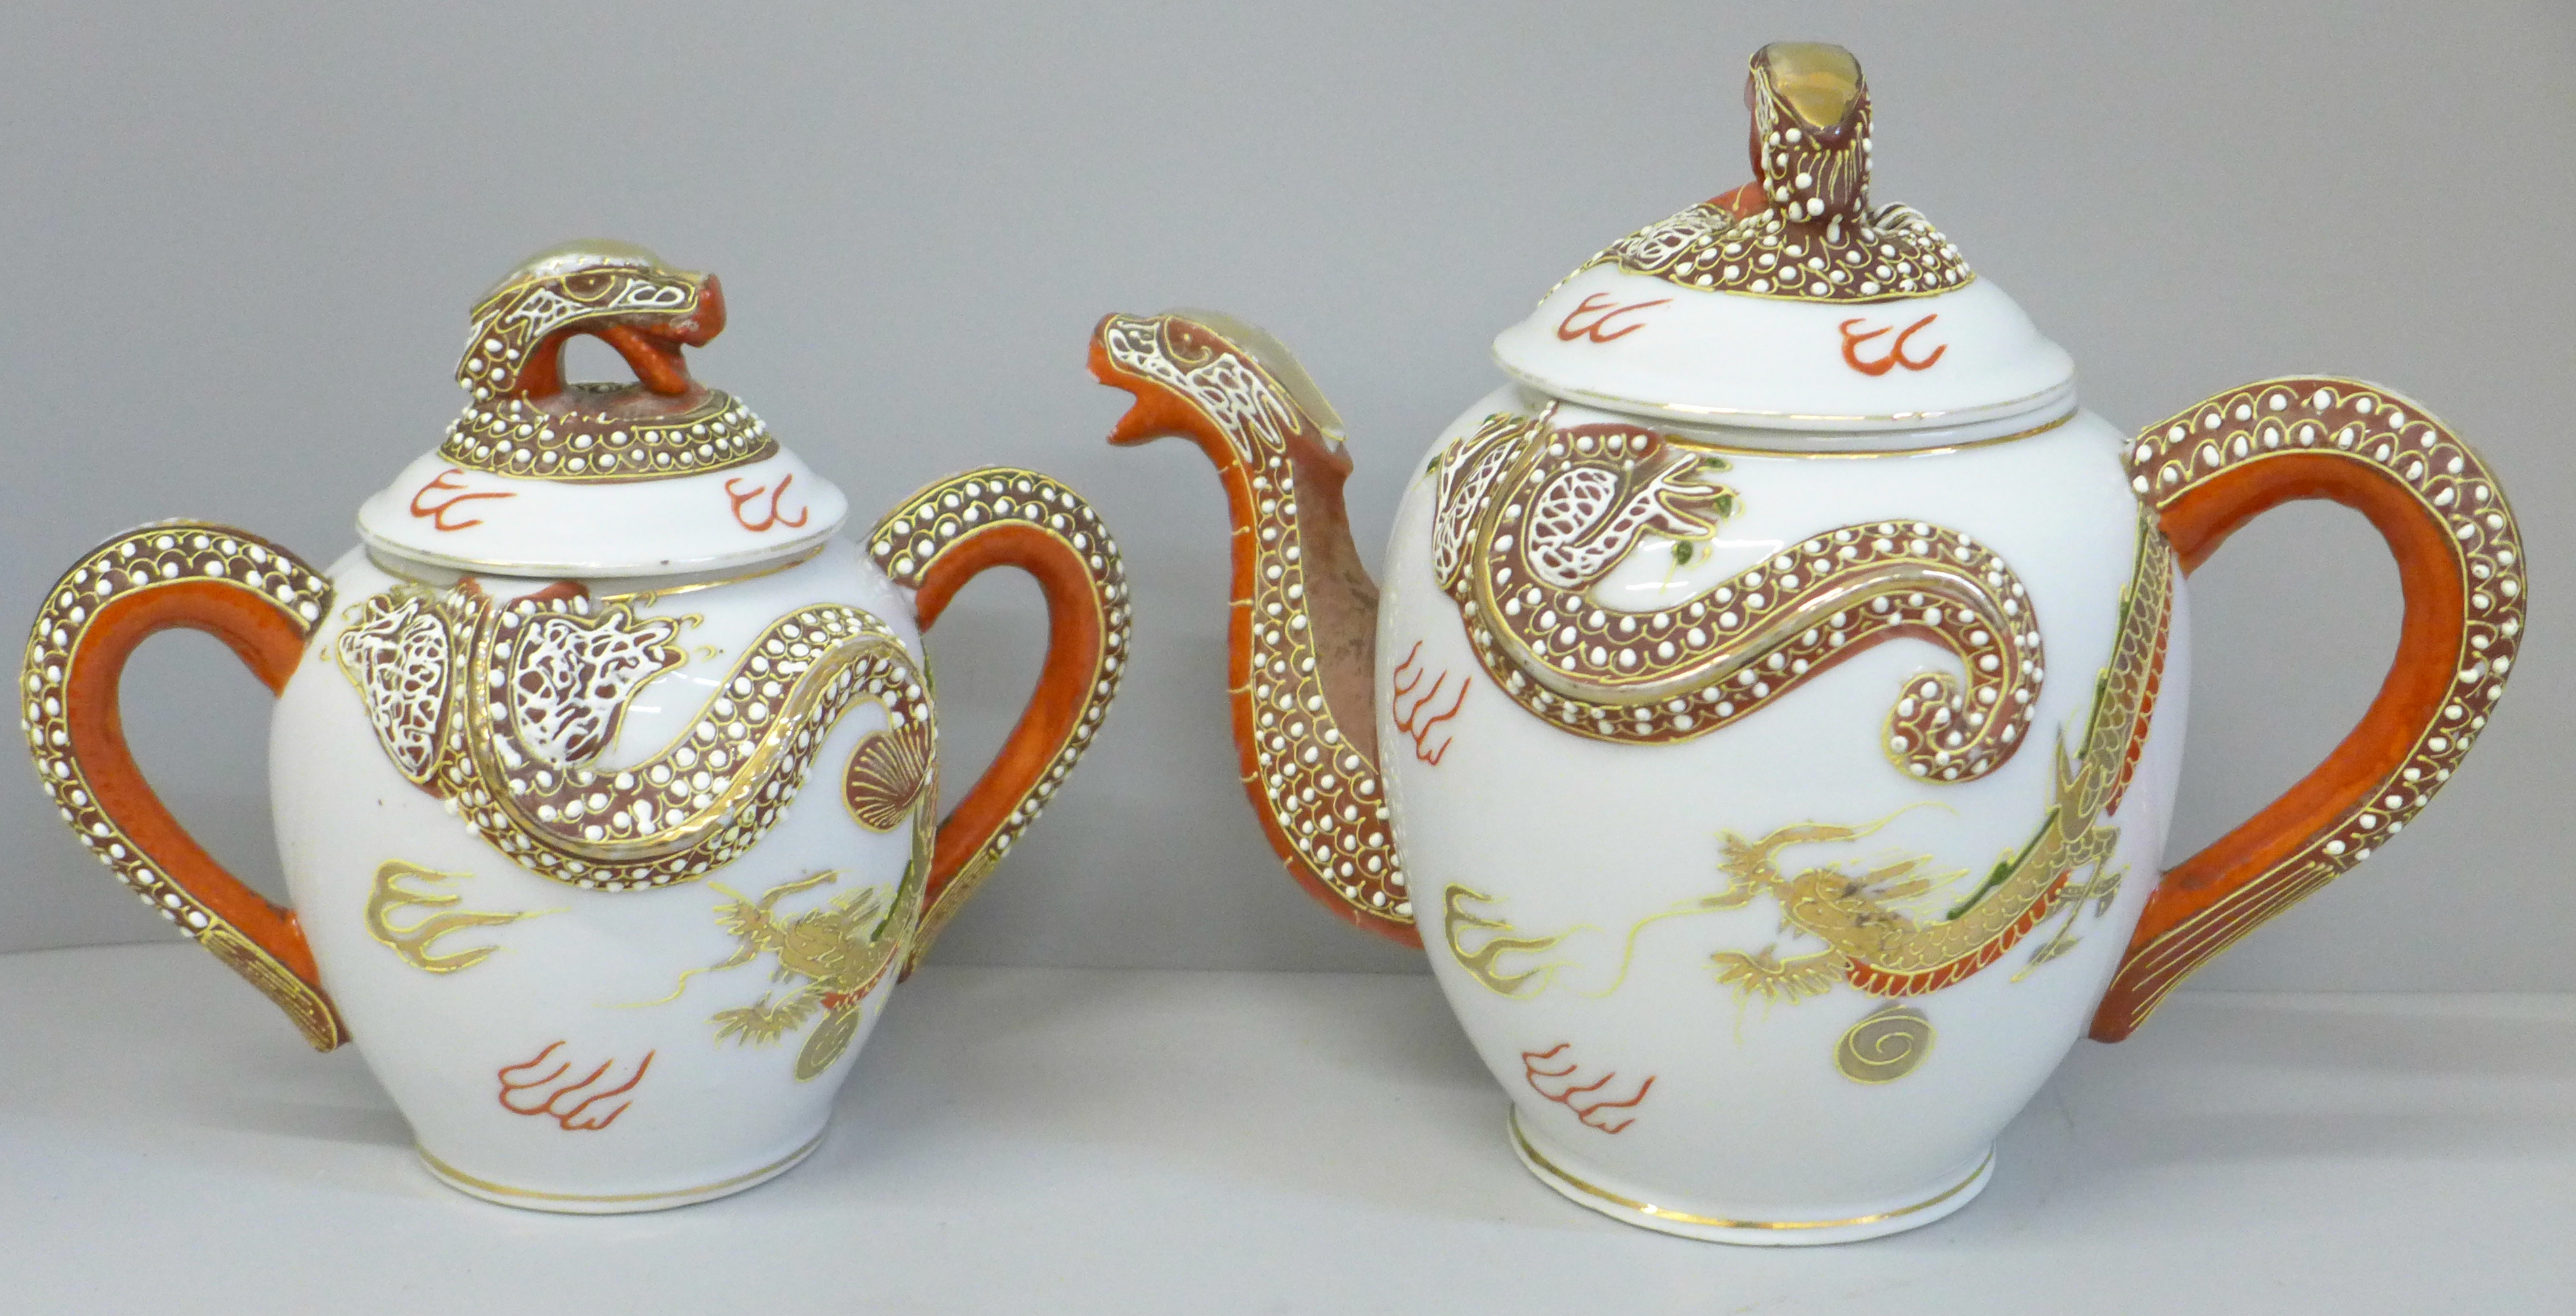 Vintage Japanese Moriage Dragonware; china teapot and a two-handled jar with lid